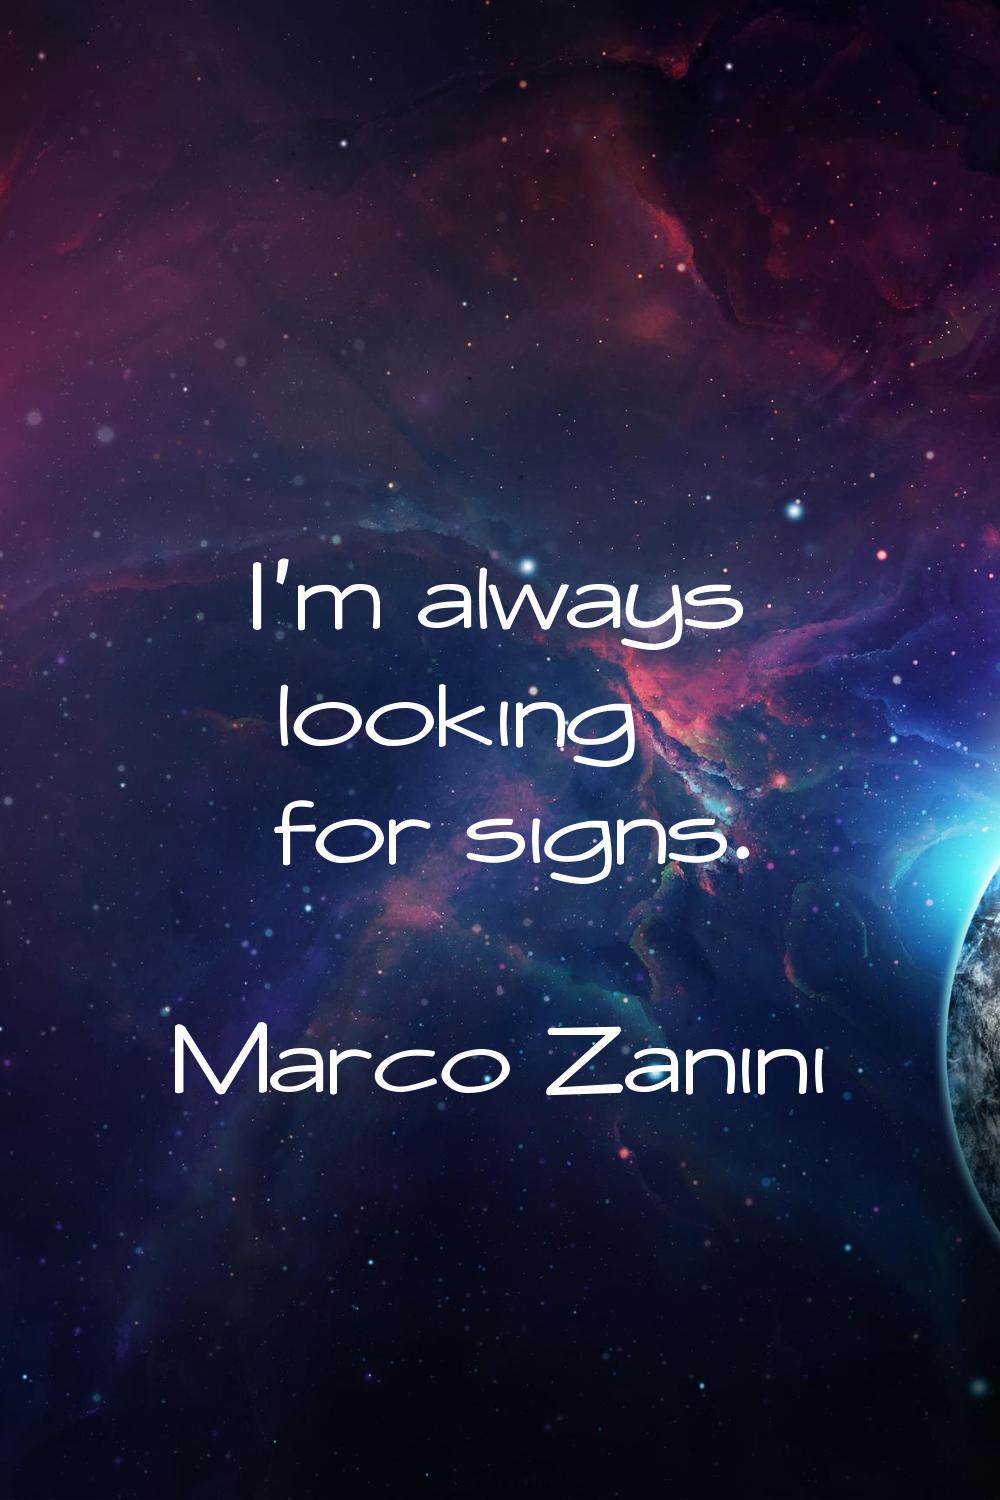 I'm always looking for signs.